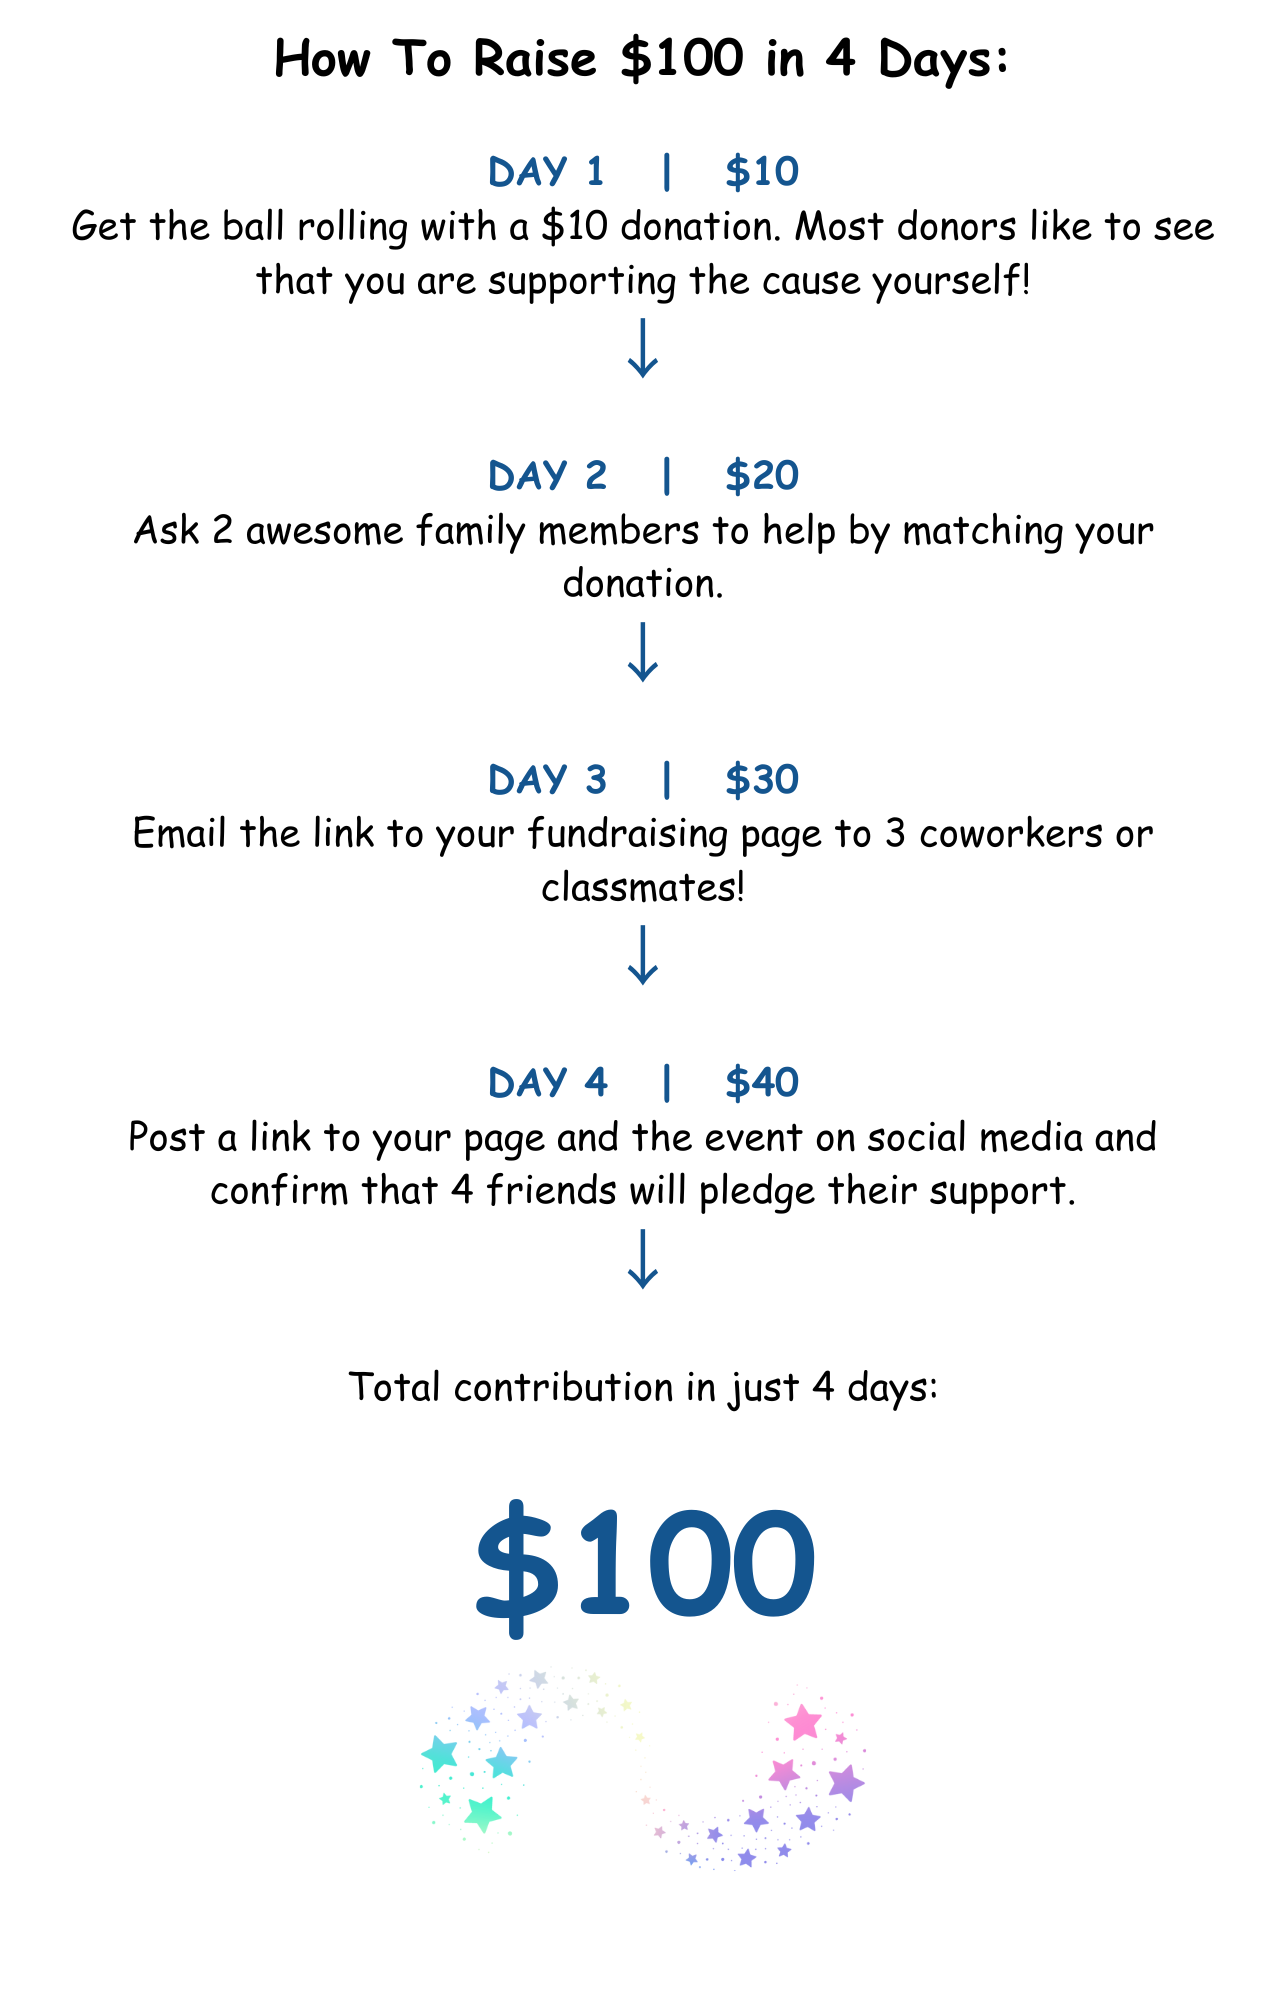 How To Raise $100 in 4 Days DAY 1  $10 Get the ball rolling with a $10 donation. Most donors like to see that you are supporting the cause yourself! ↓ DAY 2  $20 Ask 2 awesome family members to he.png